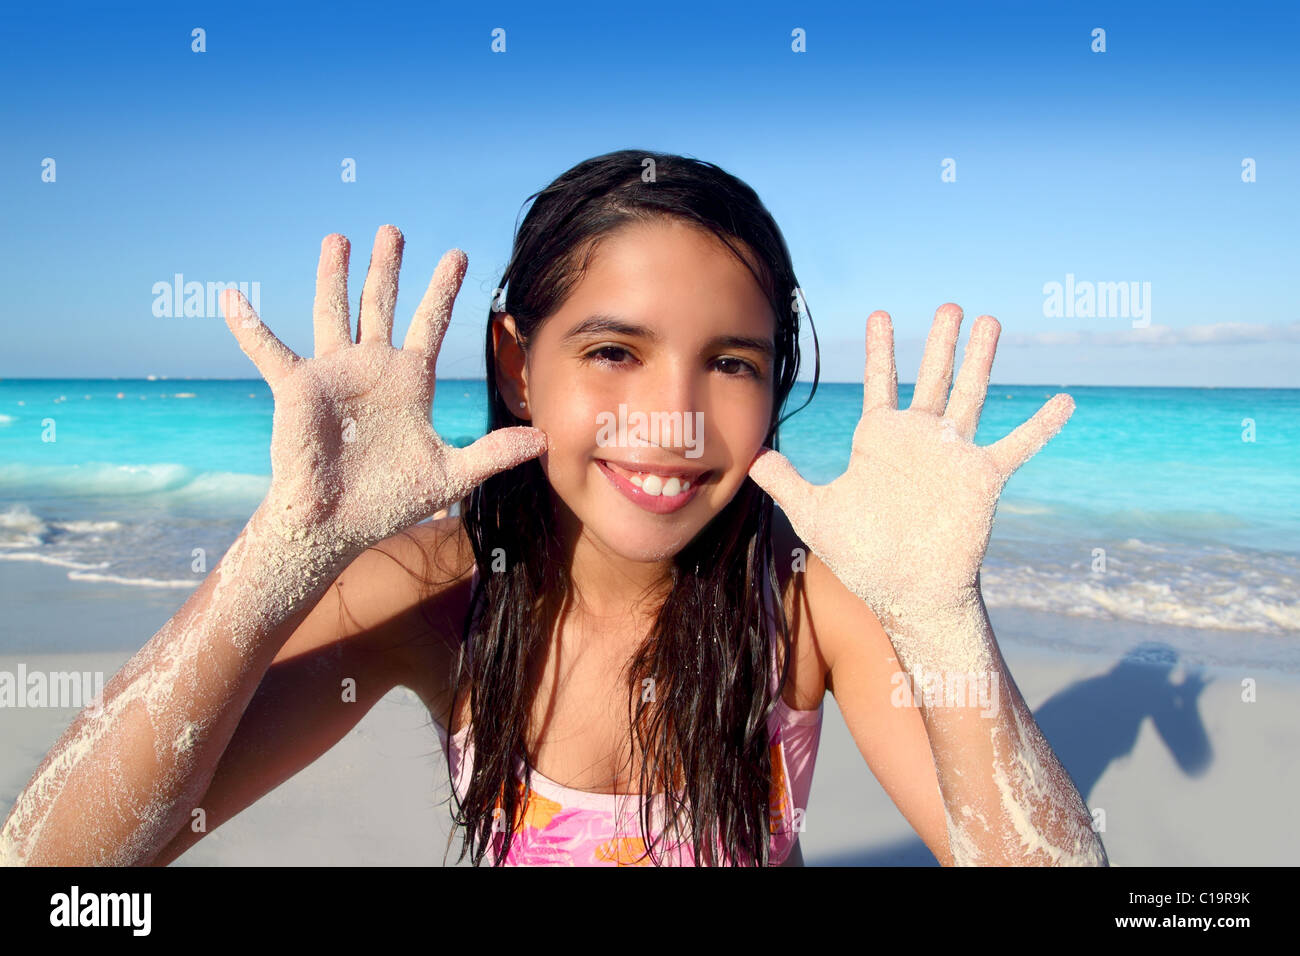 latin indian teen girl playing beach showing sandy hands in Caribbean tropical sea Stock Photo